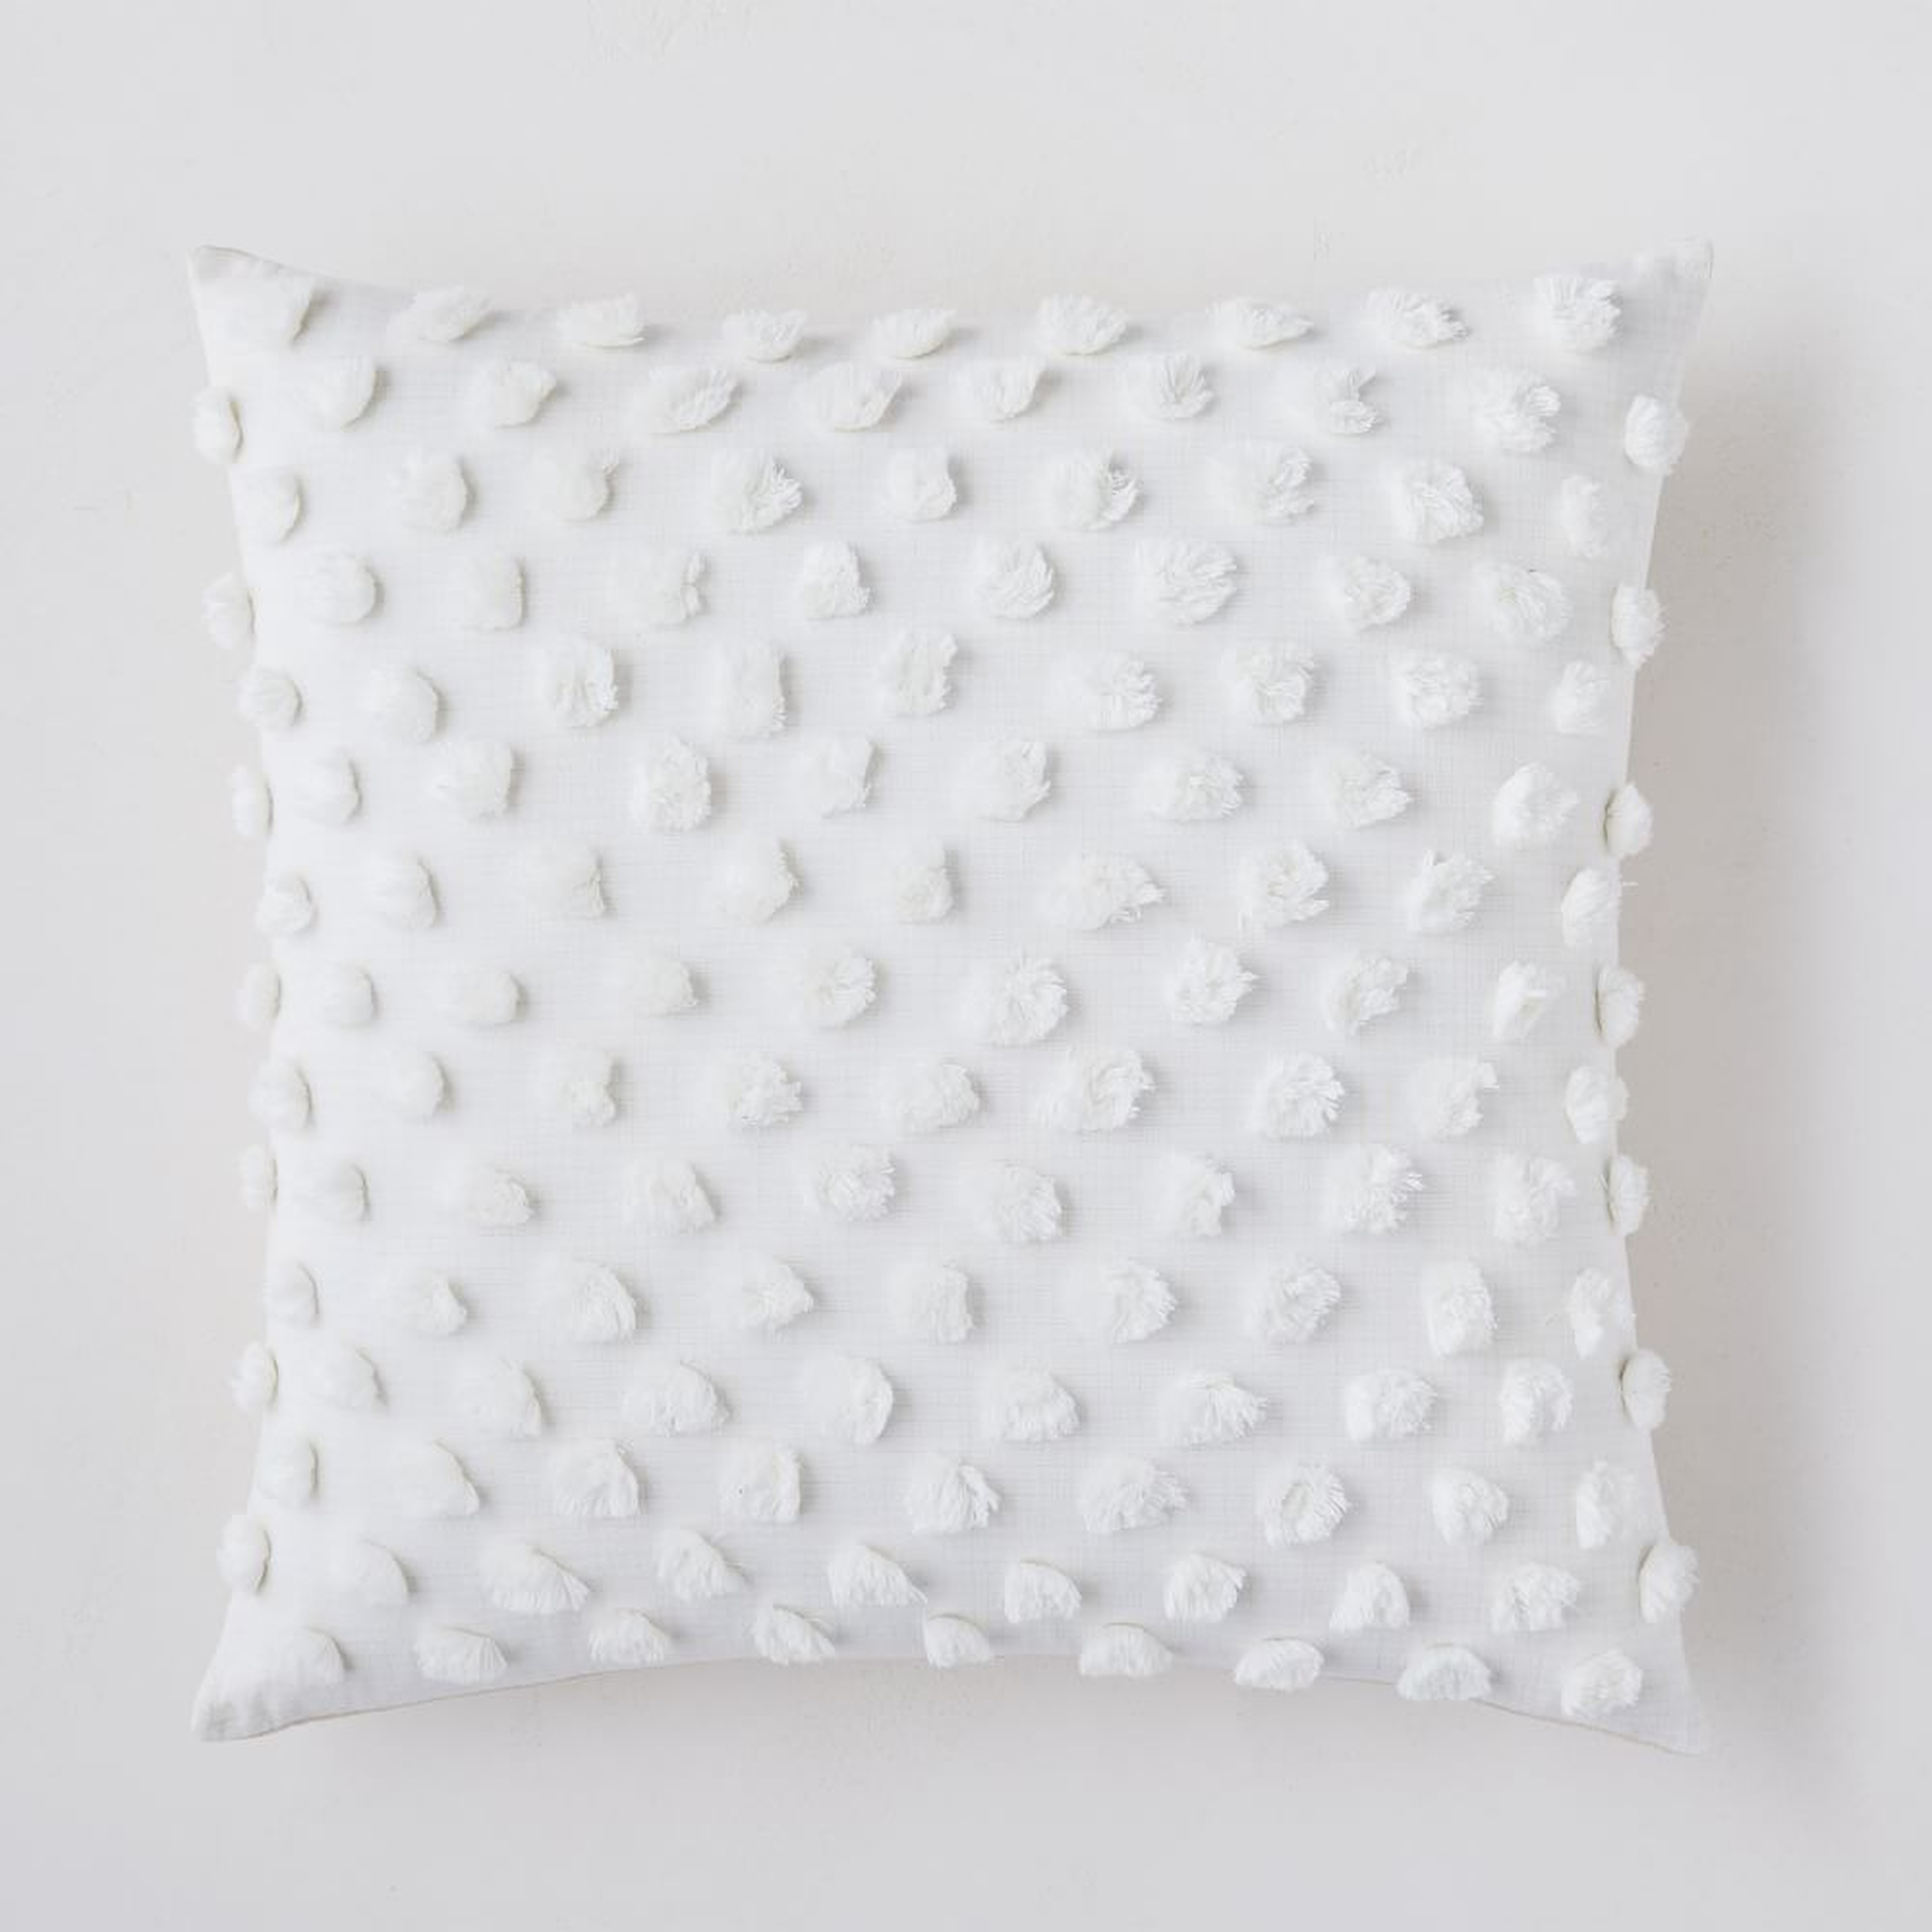 Candlewick Pillow Cover, 24"x24", White - West Elm